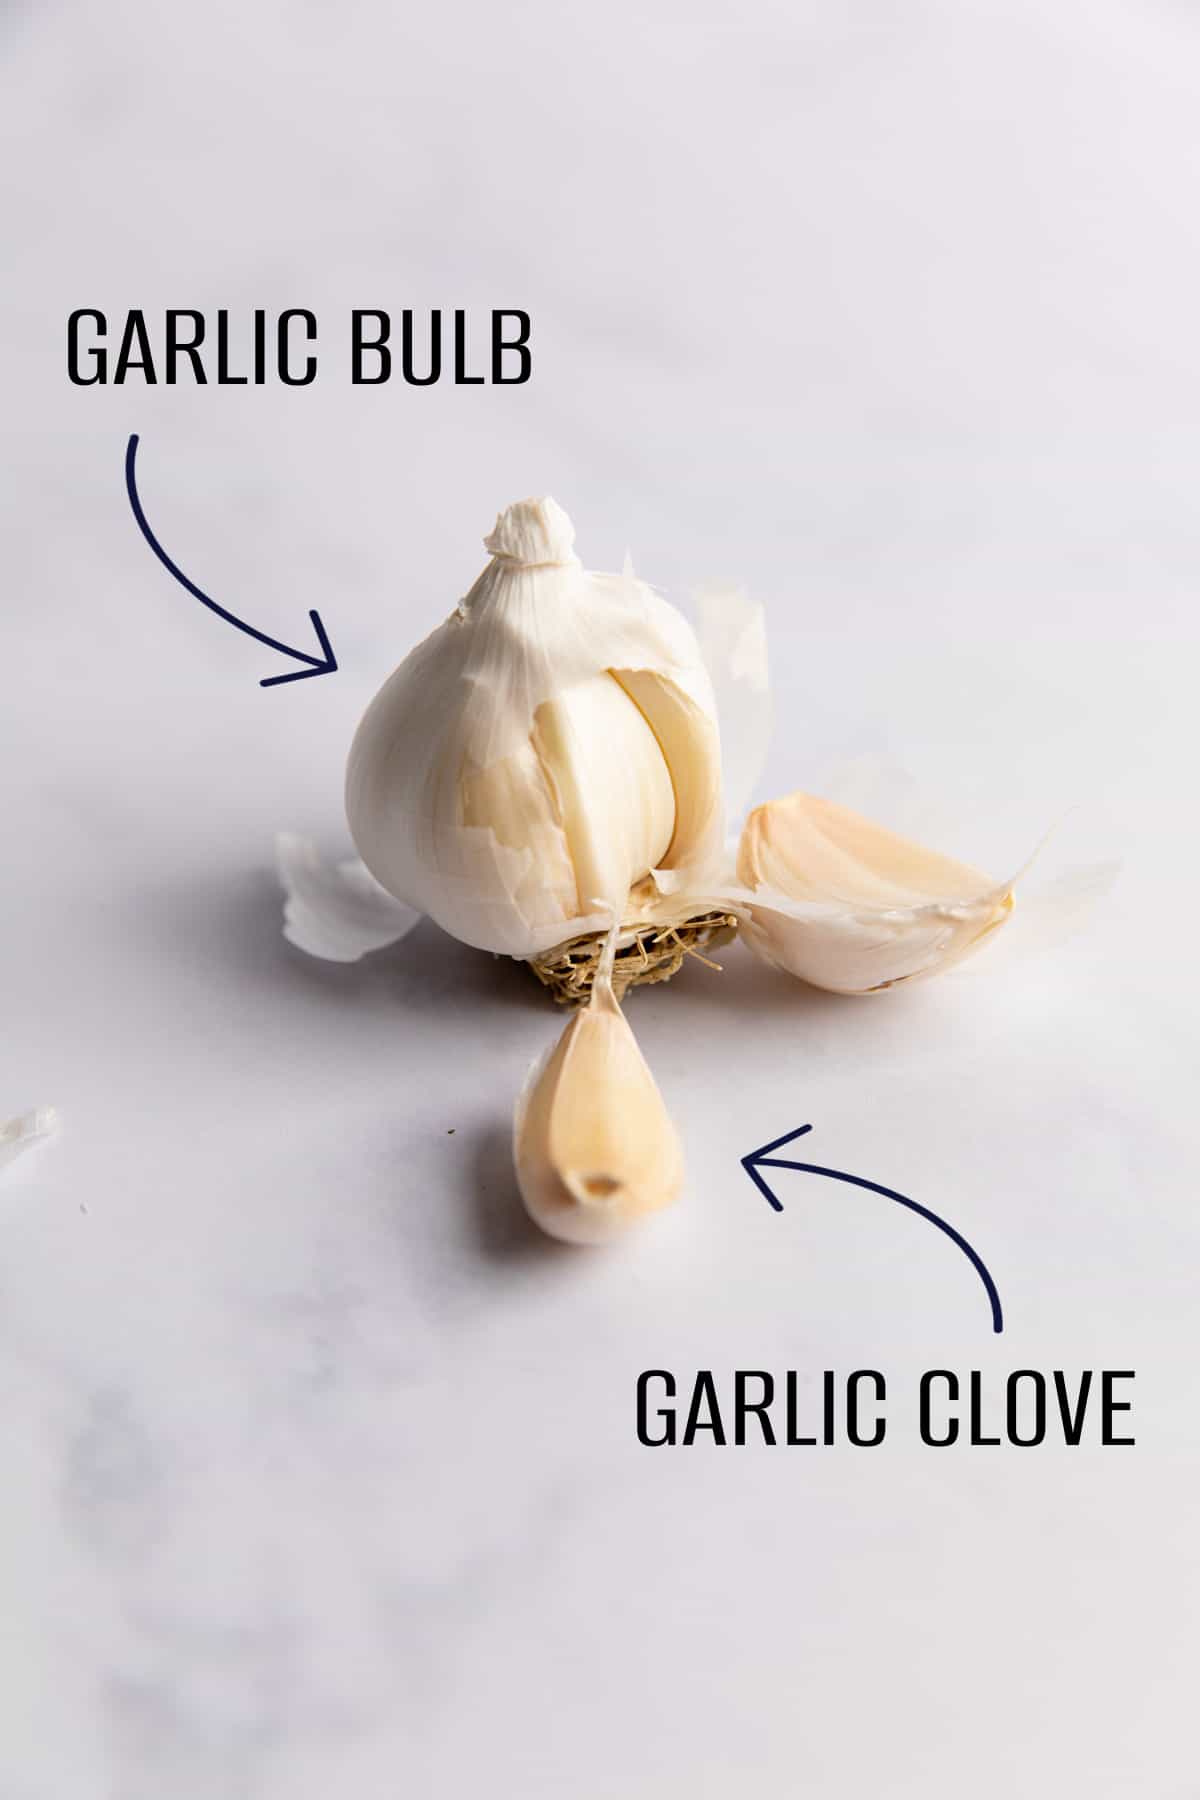 One clove of garlic compared to a bulb of garlic.